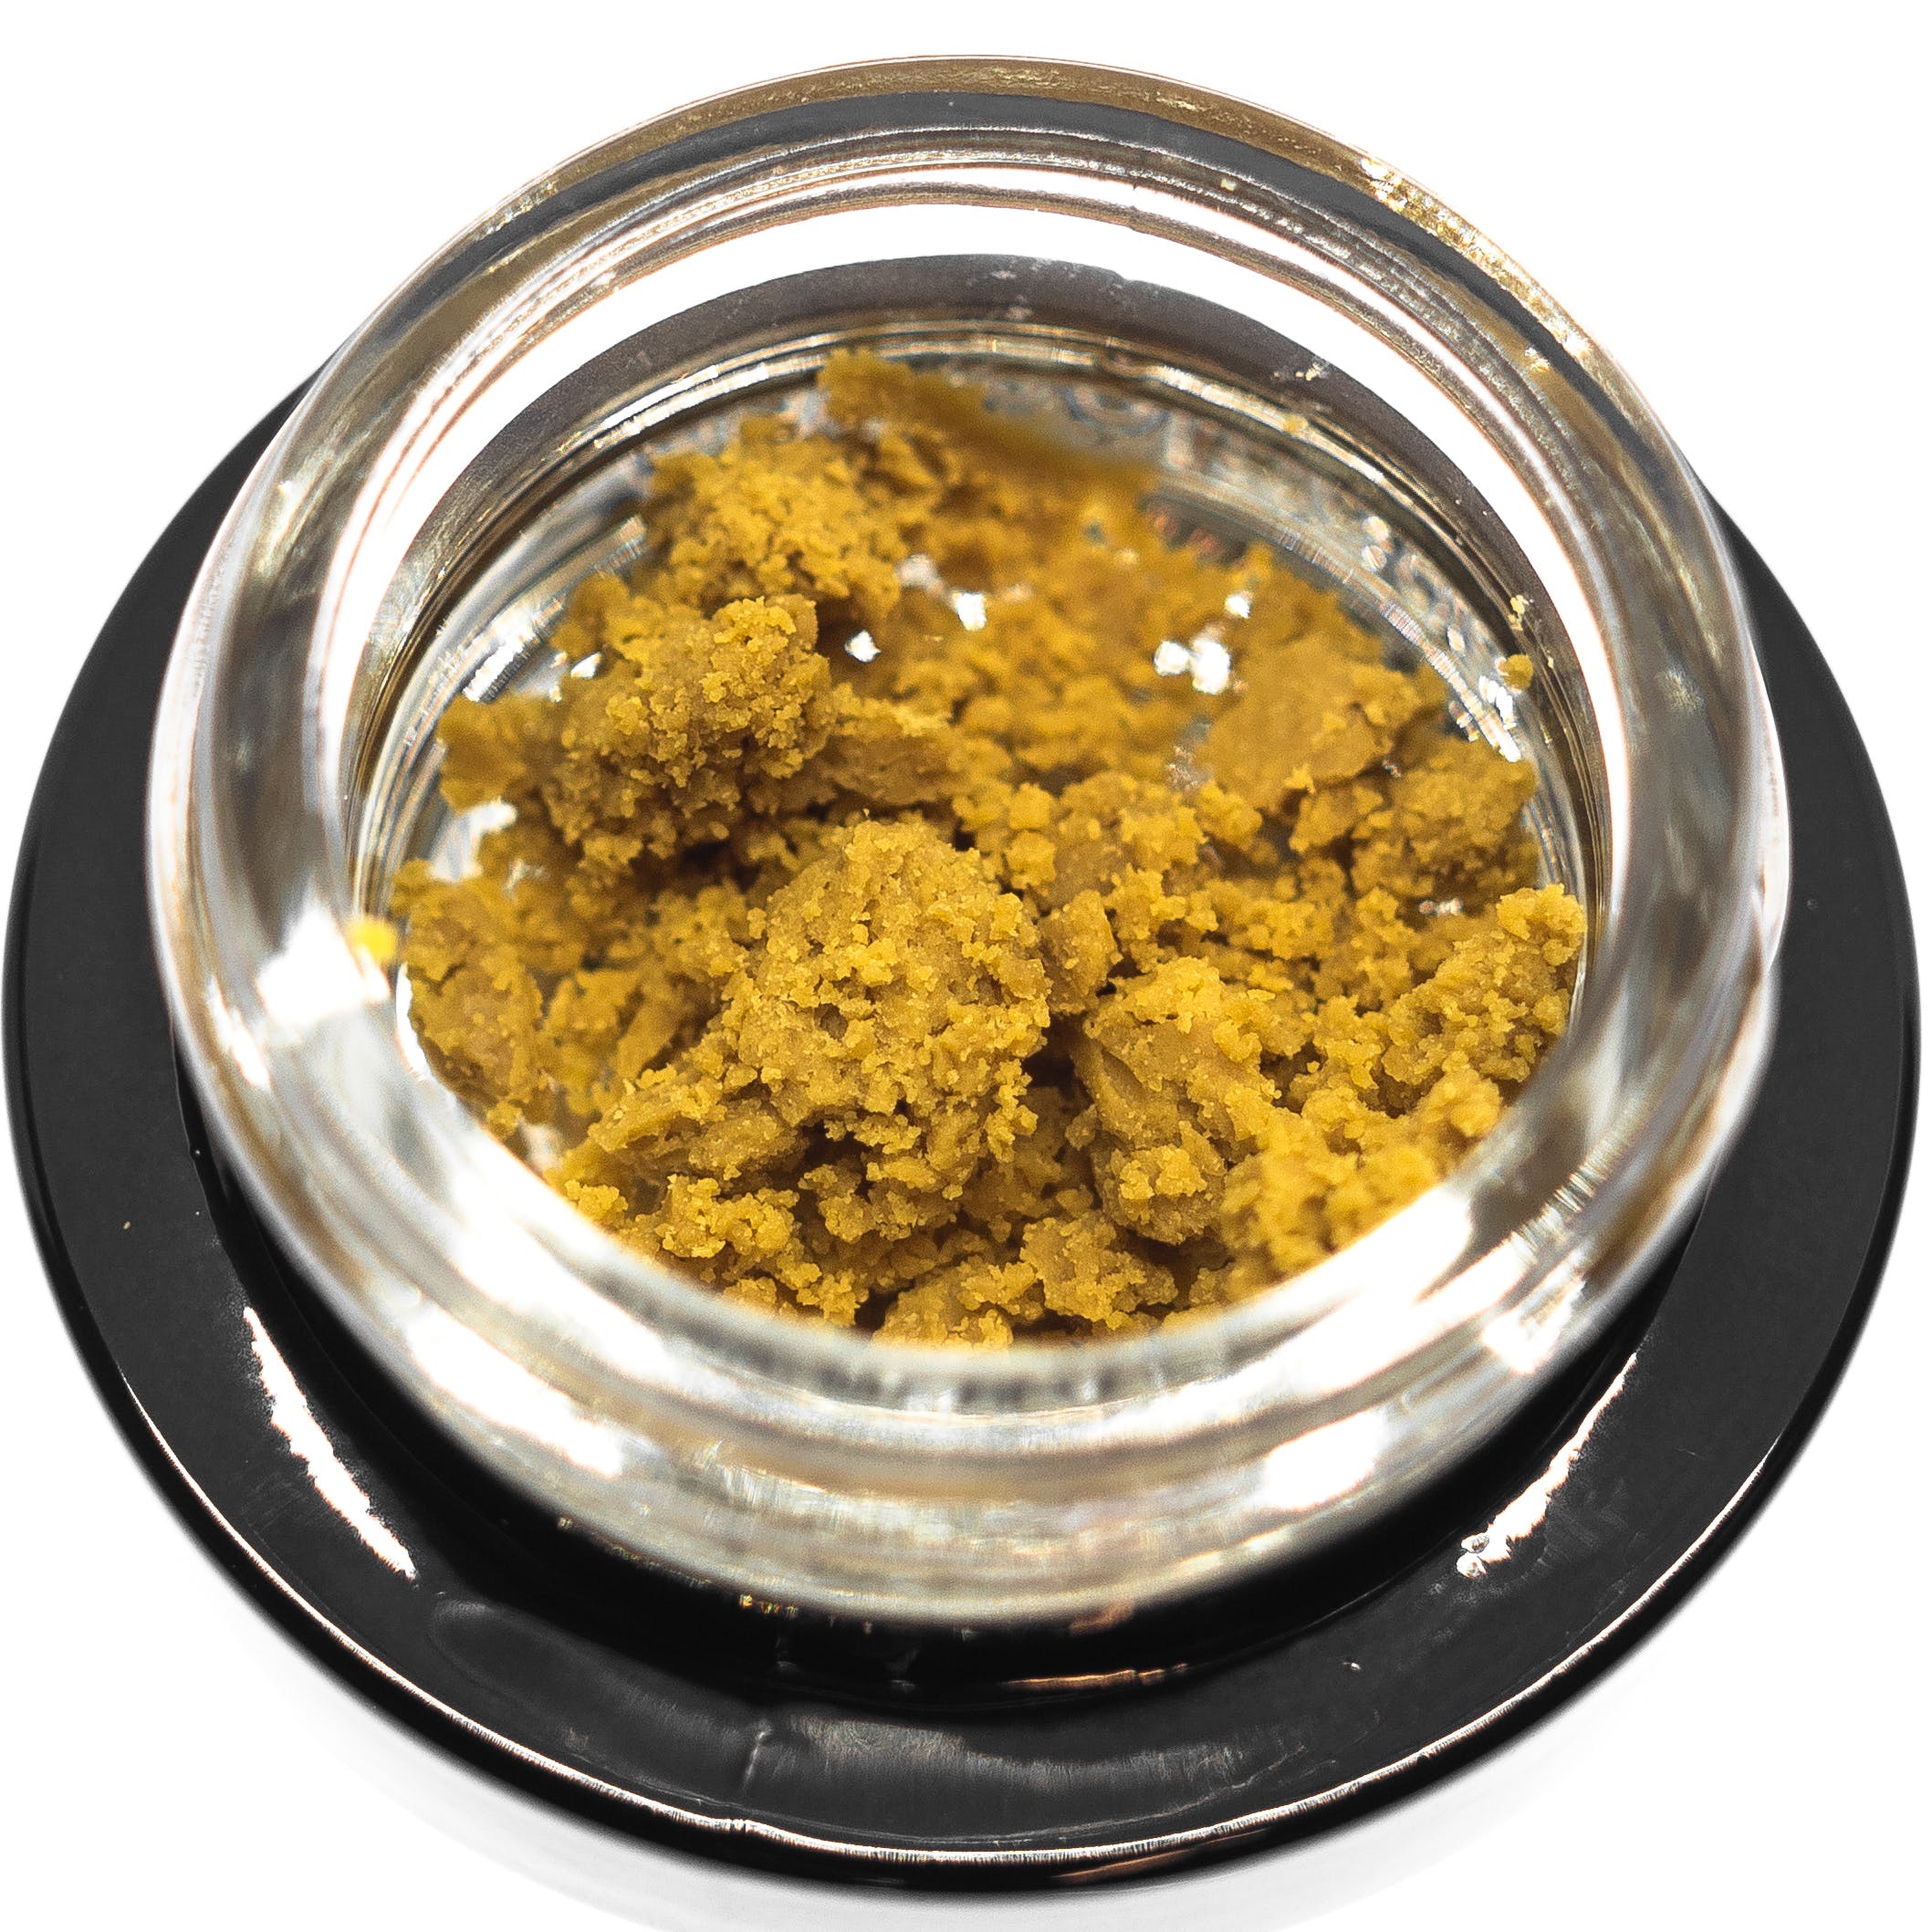 concentrate-2420-hrvst-grape-cola-wax-i-68-28-25